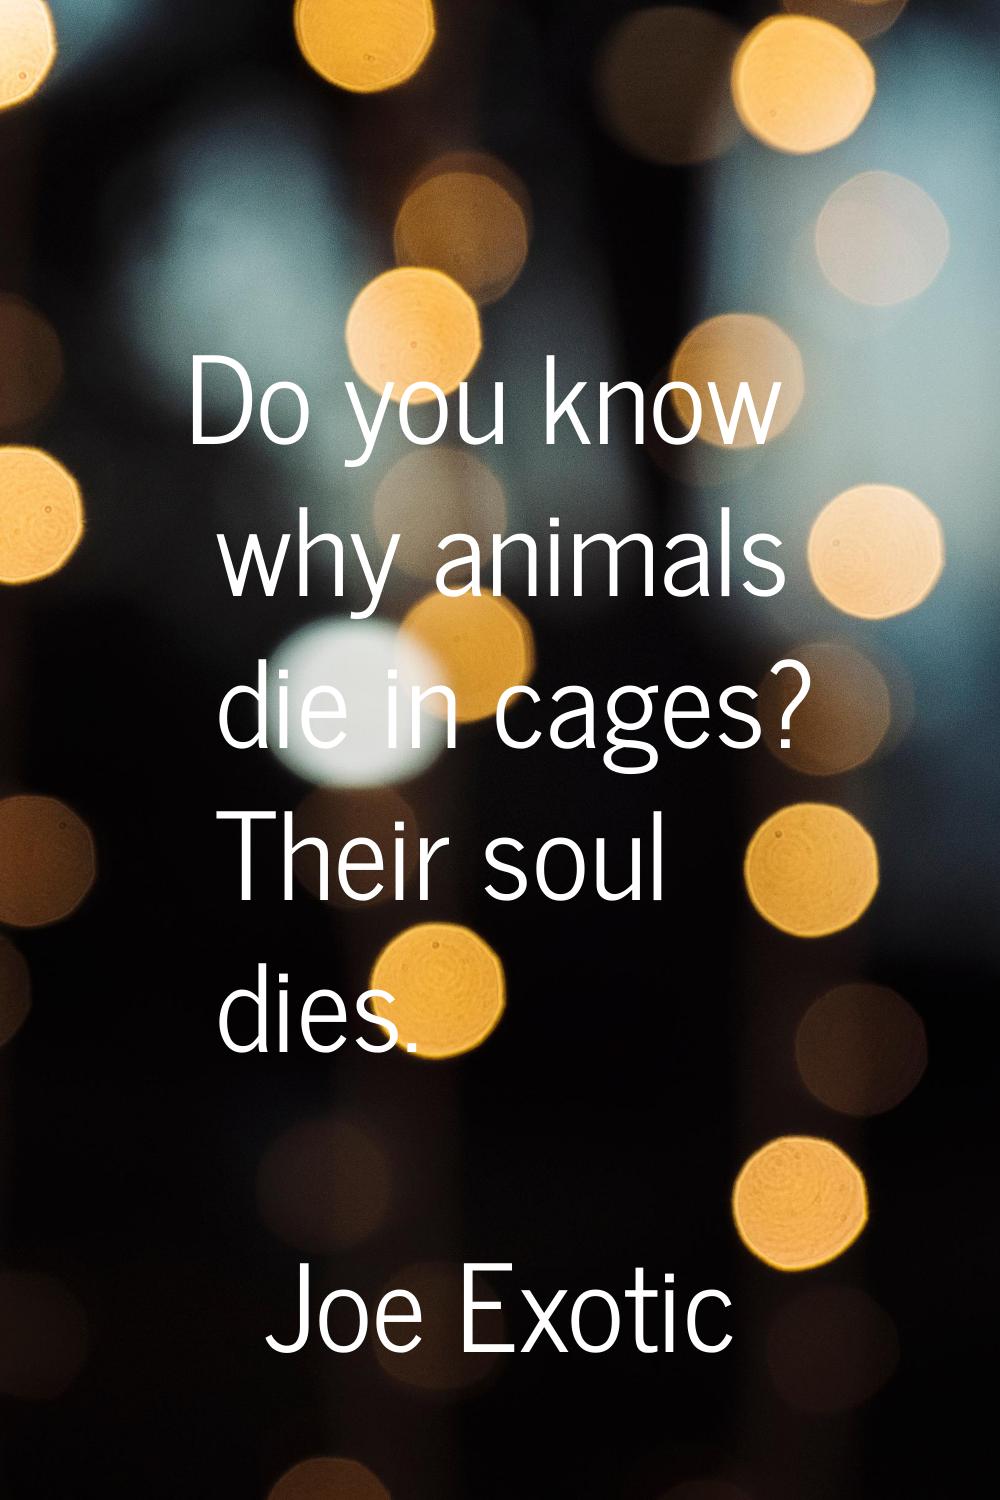 Do you know why animals die in cages? Their soul dies.